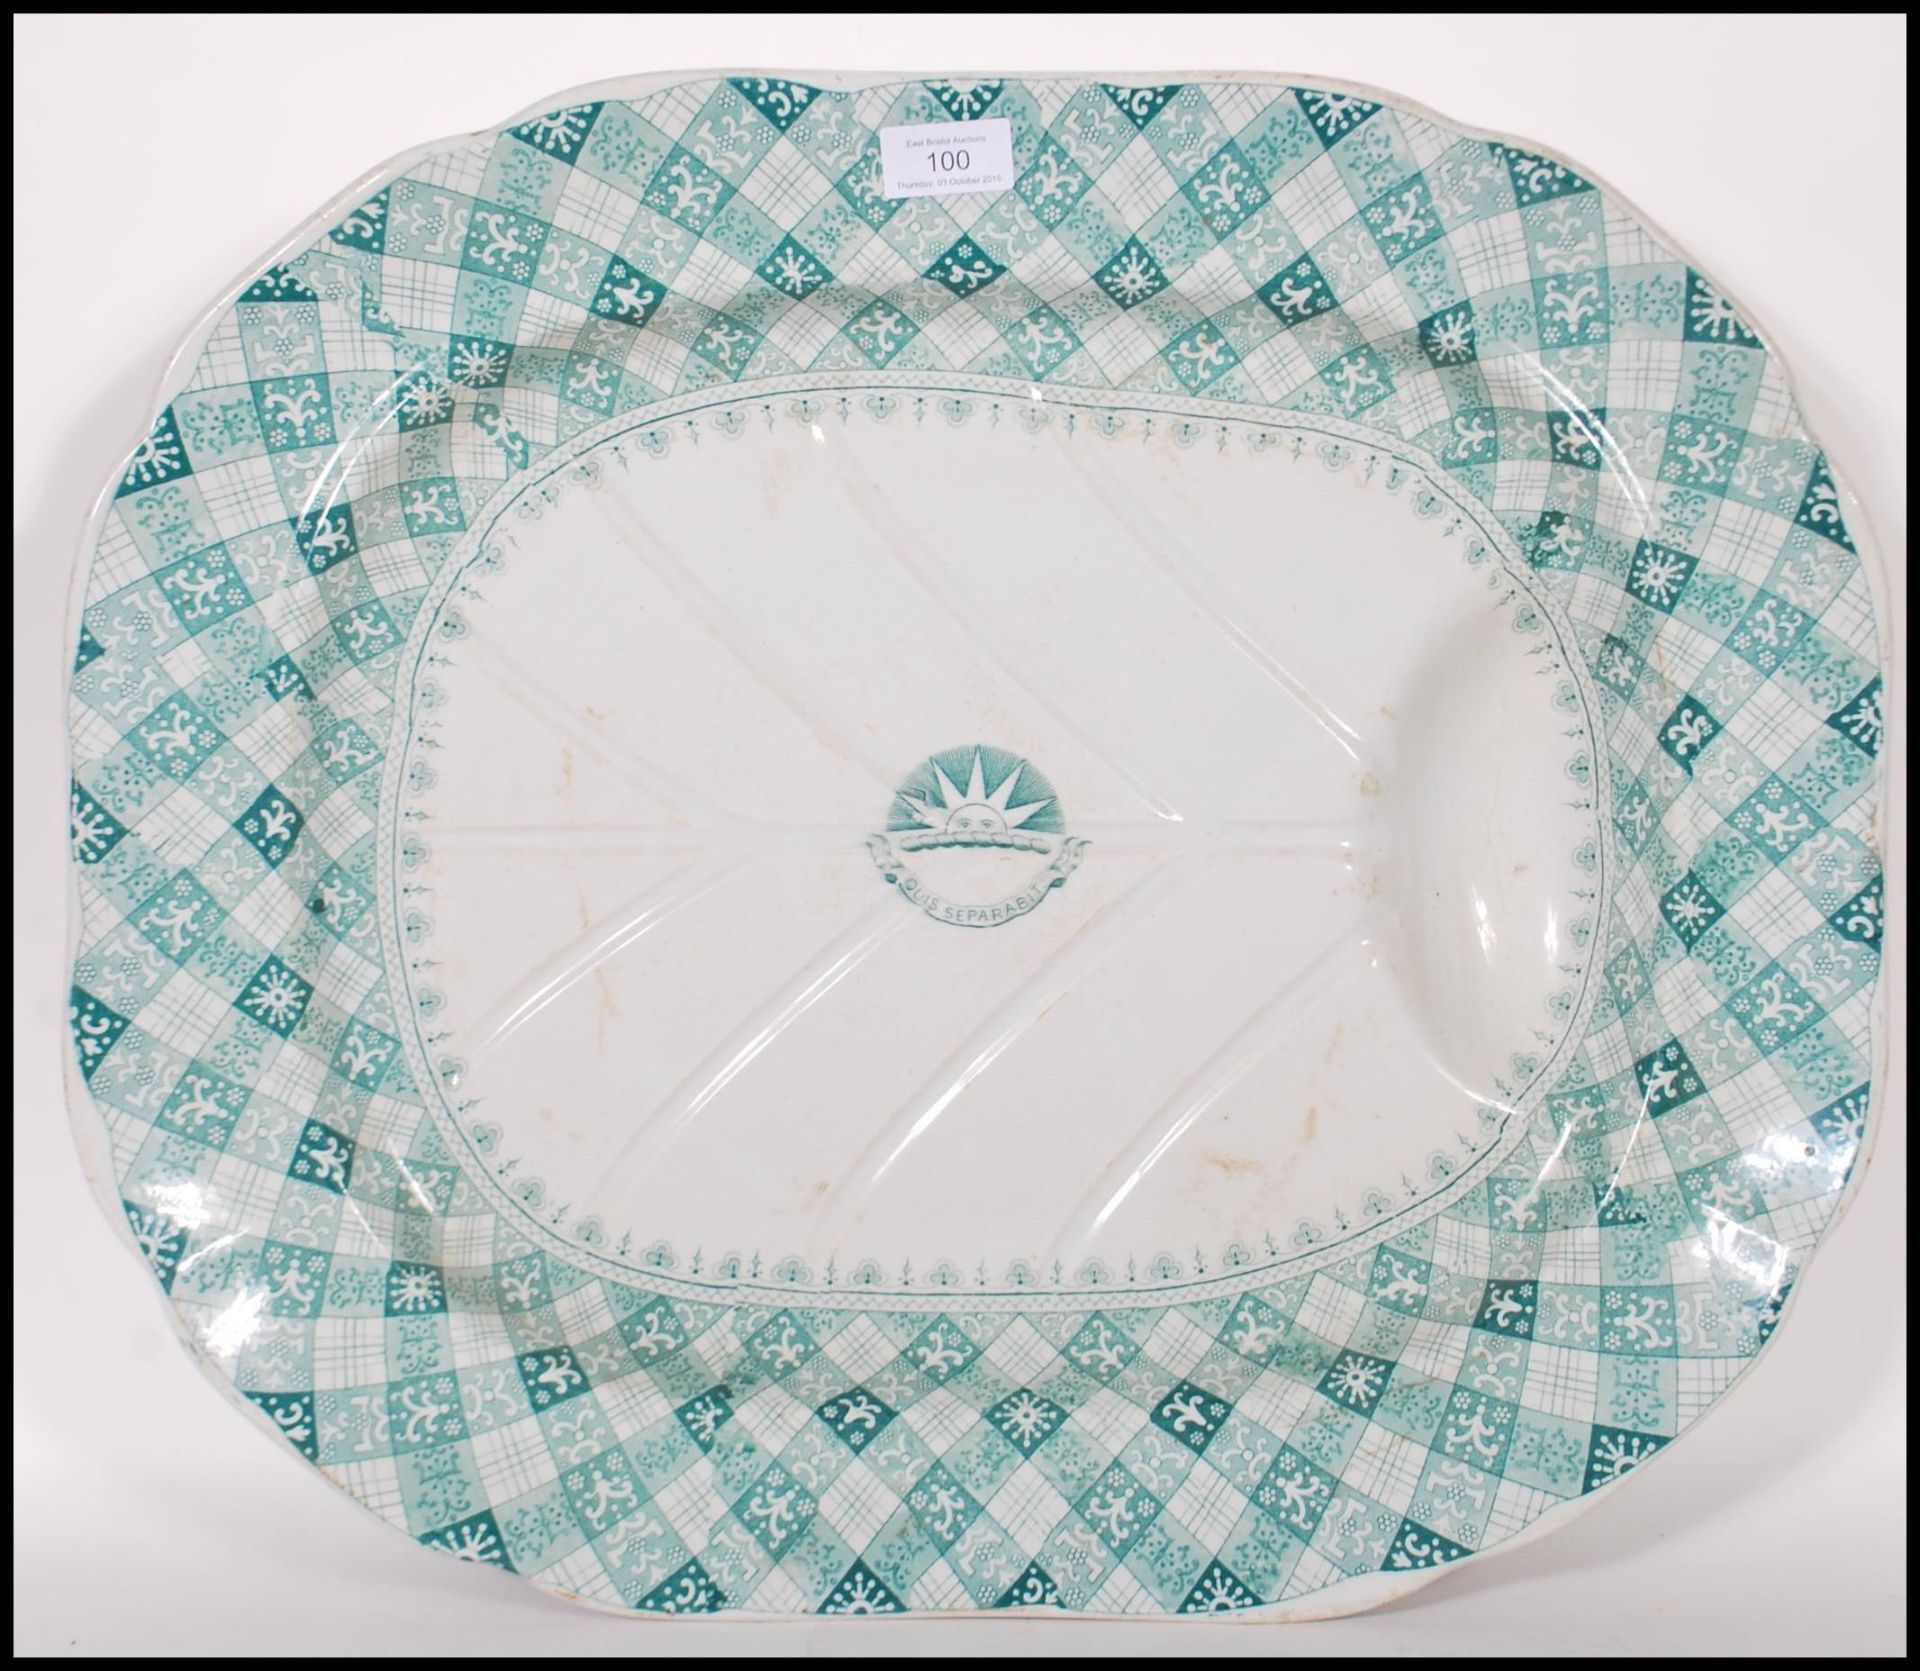 A P&O Lines ‘Caledonian’ pattern ironstone meat plate by Ridgway, Morley & Co green transfer printed